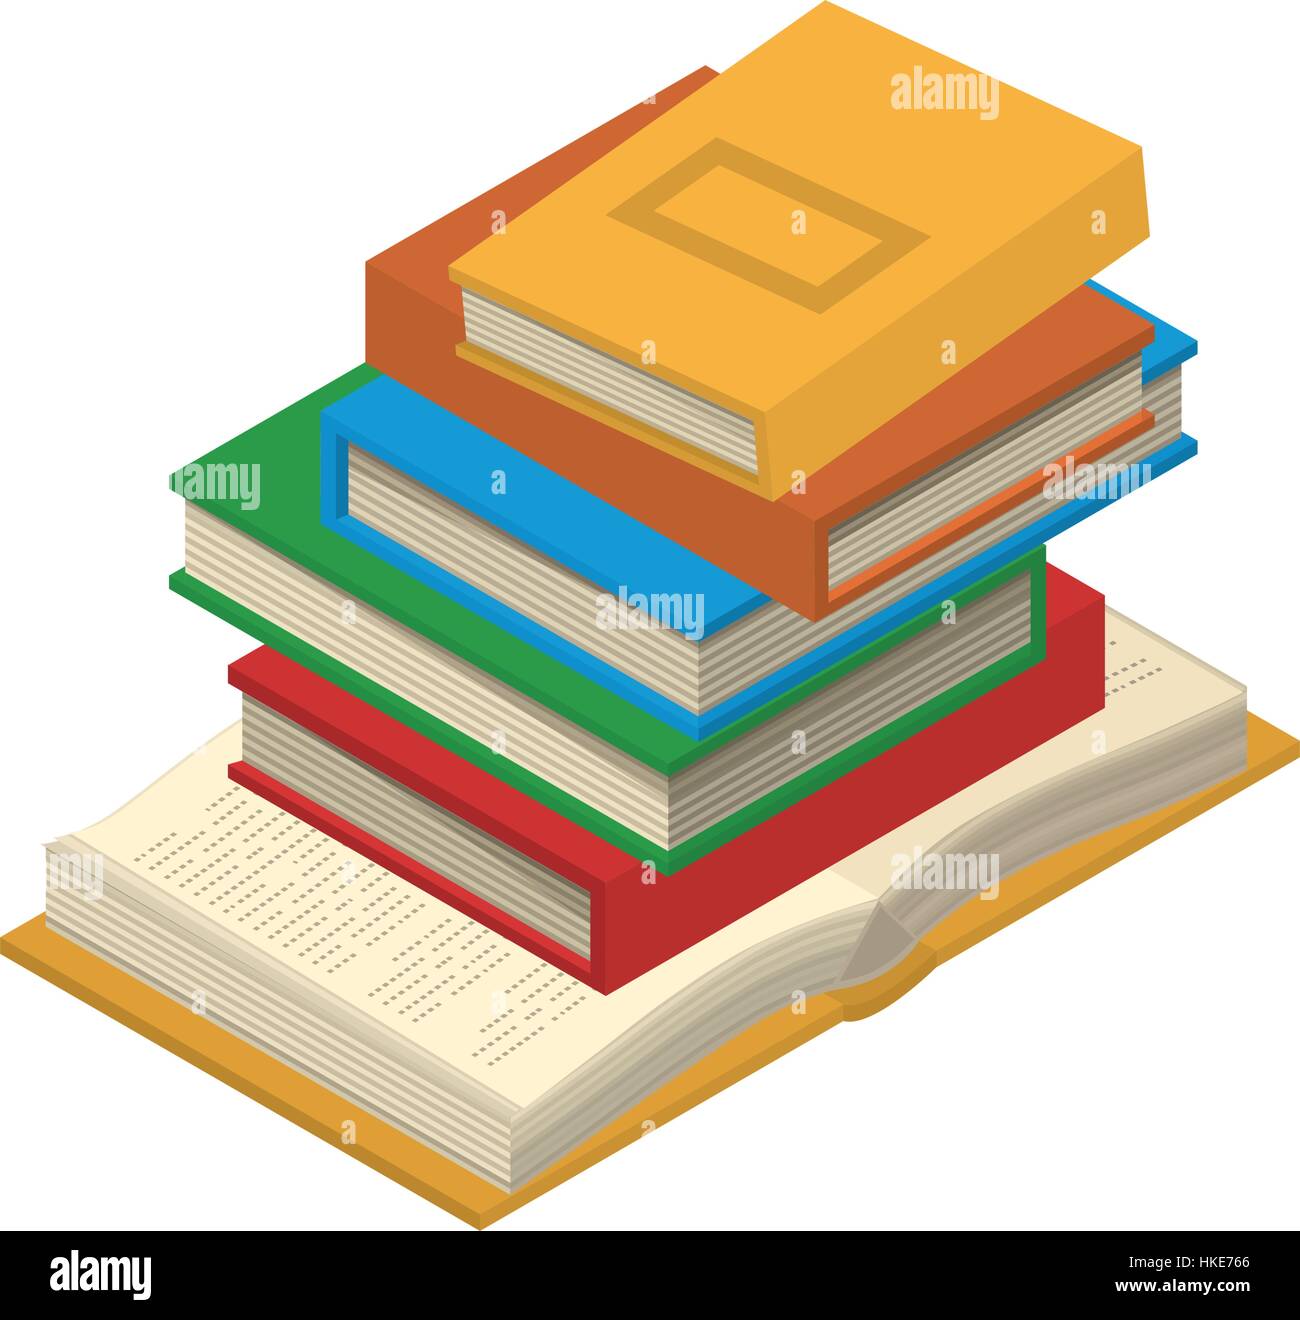 Vertical stack of books and tutorials. Stock Vector